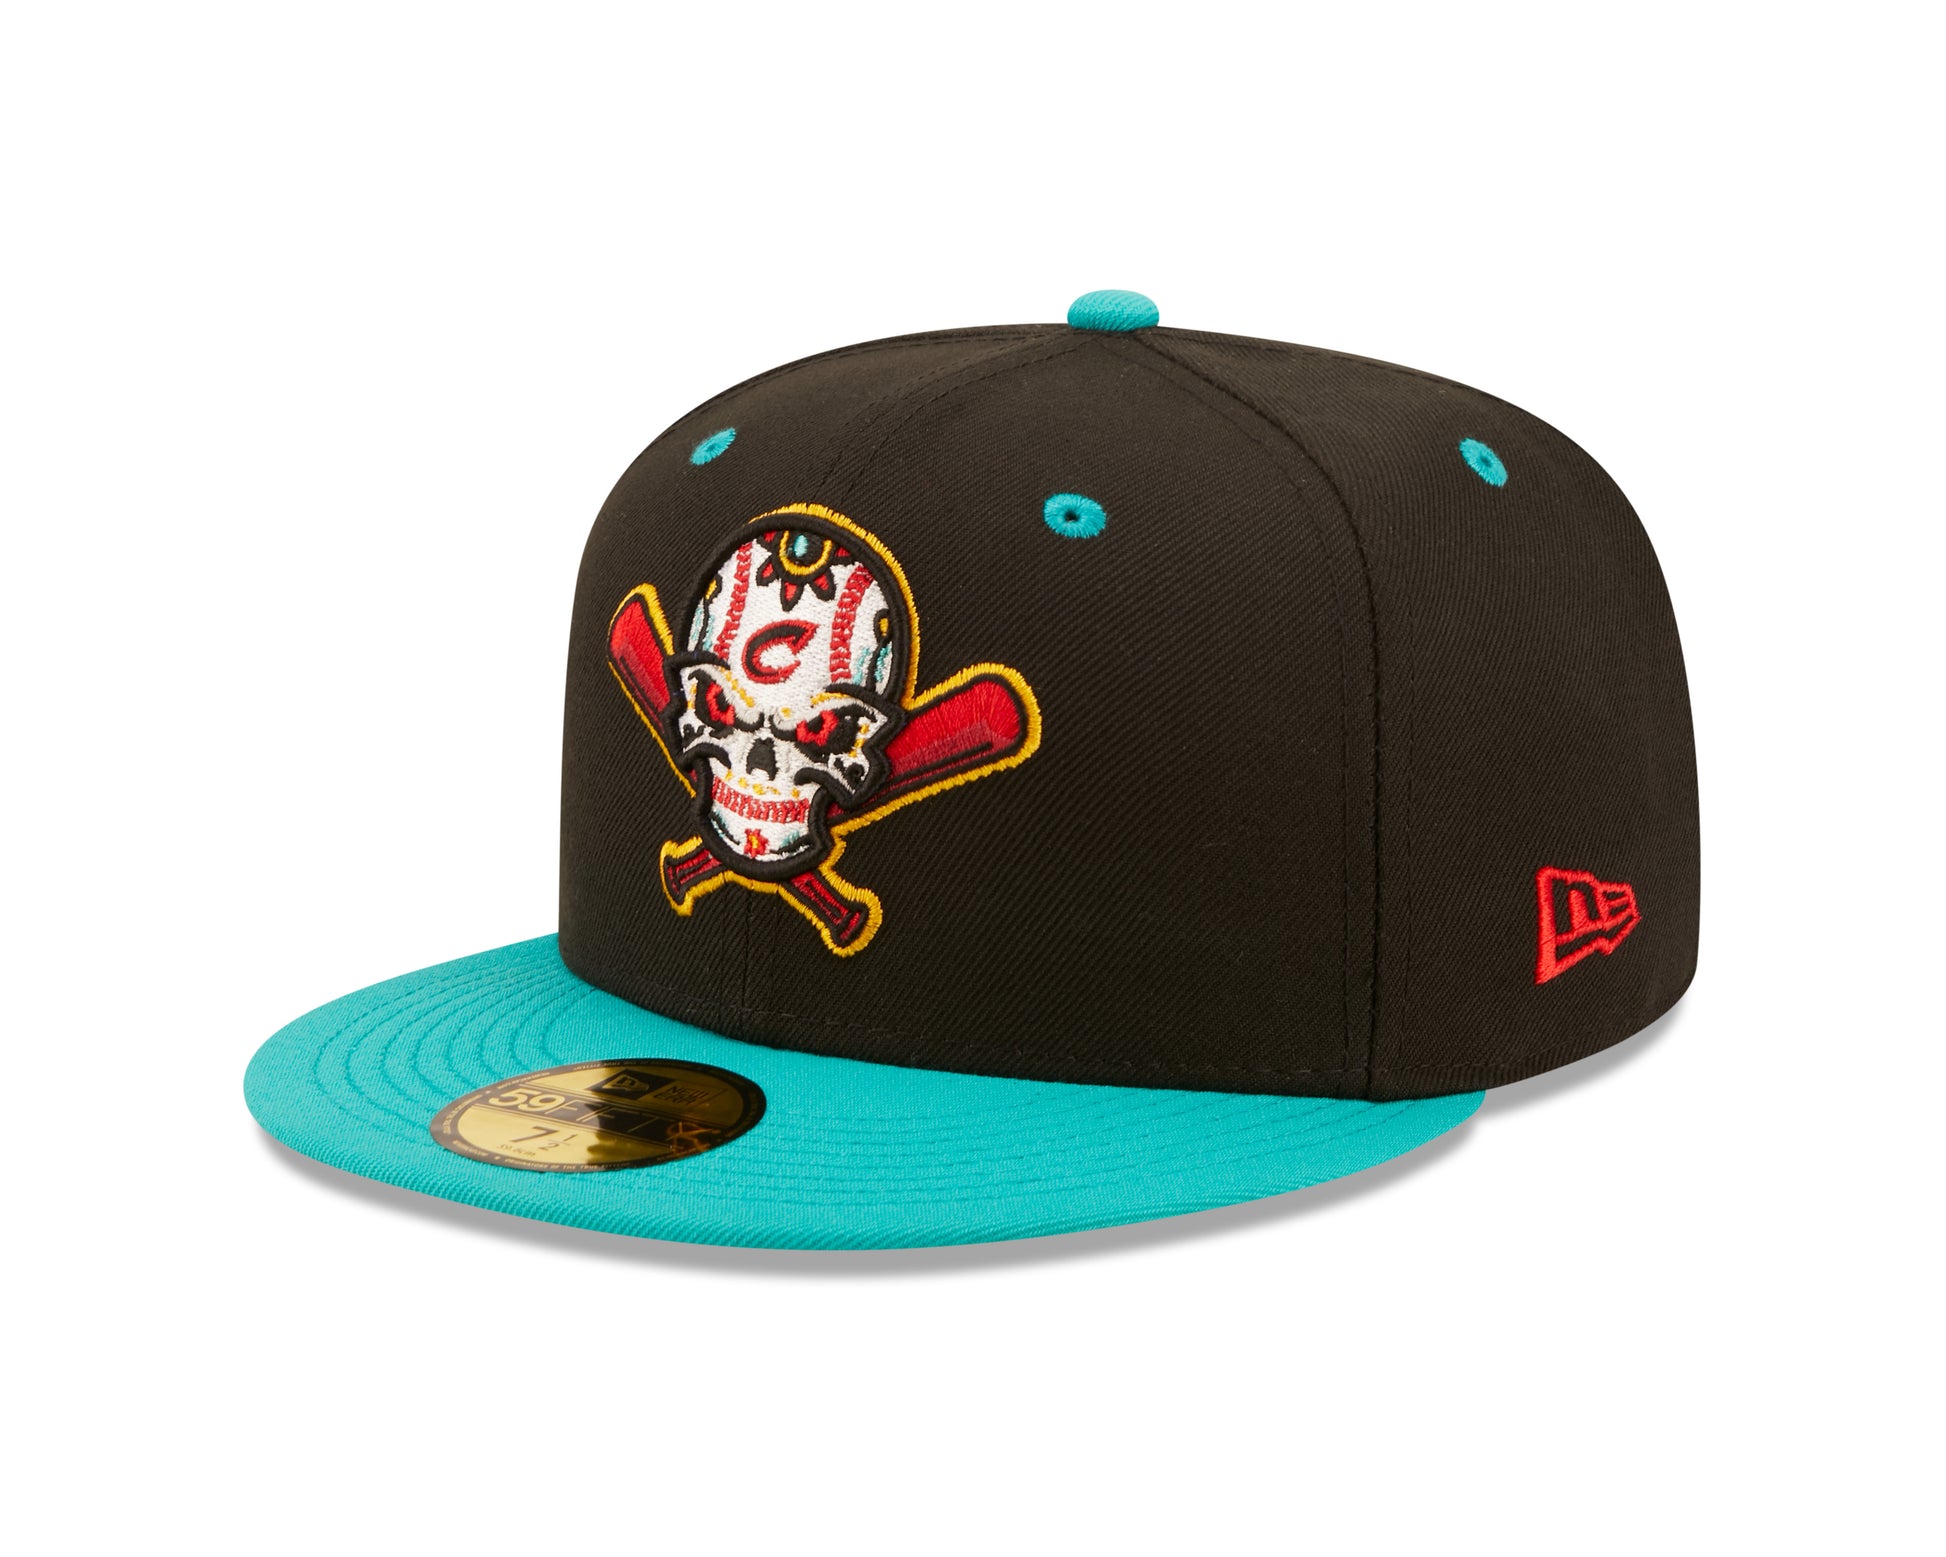 New Era - 59fifty Fitted - MiLB - COPA - Columbus Clippers - Black/Teal - Headz Up 